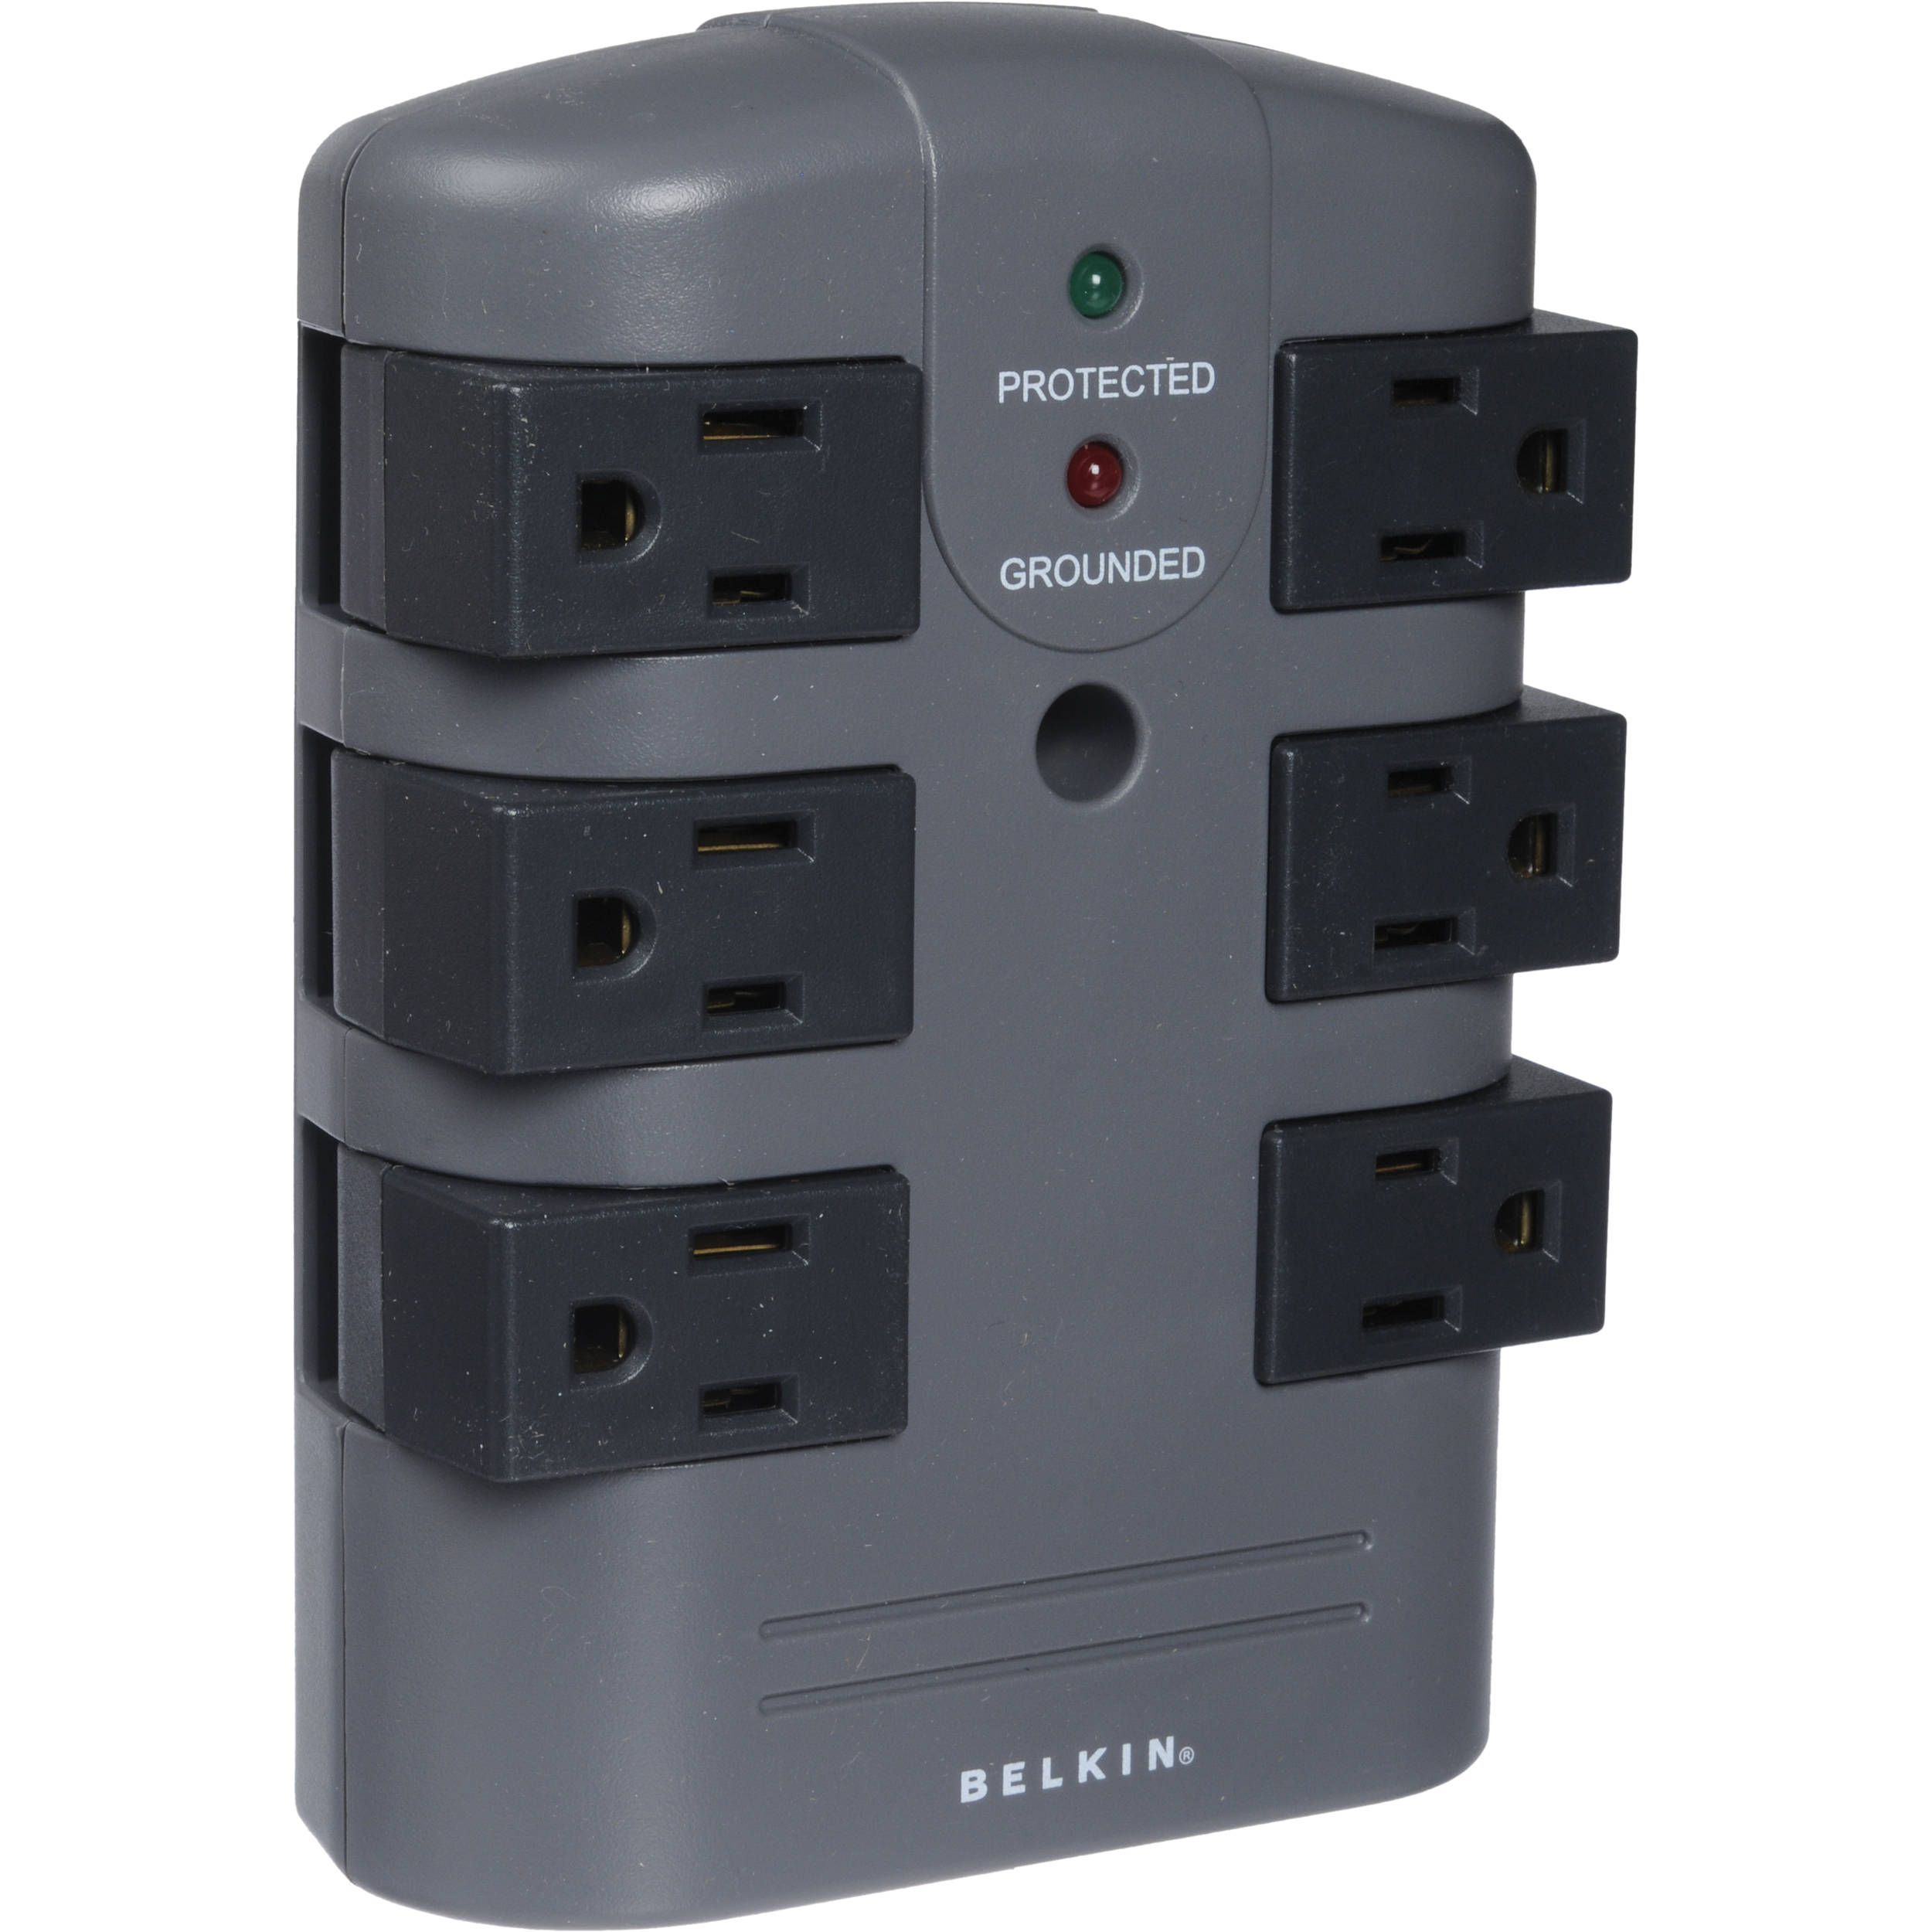 Which Of The Following Is Not True About Your Surge Protector?